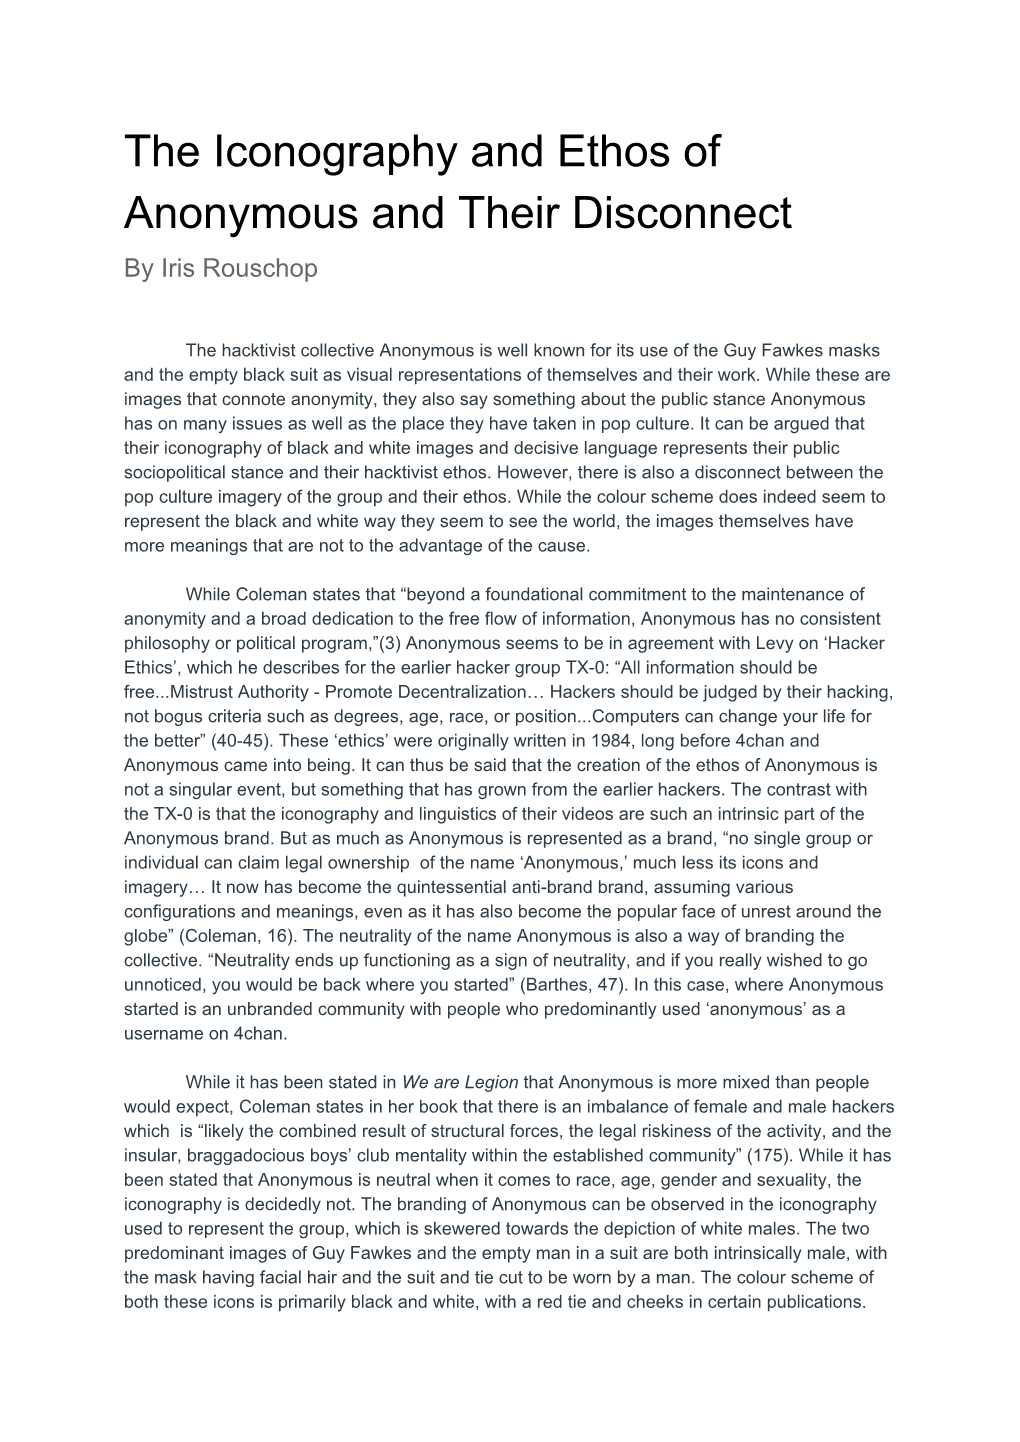 The Iconography and Ethos of Anonymous and Their Disconnect by Iris Rouschop